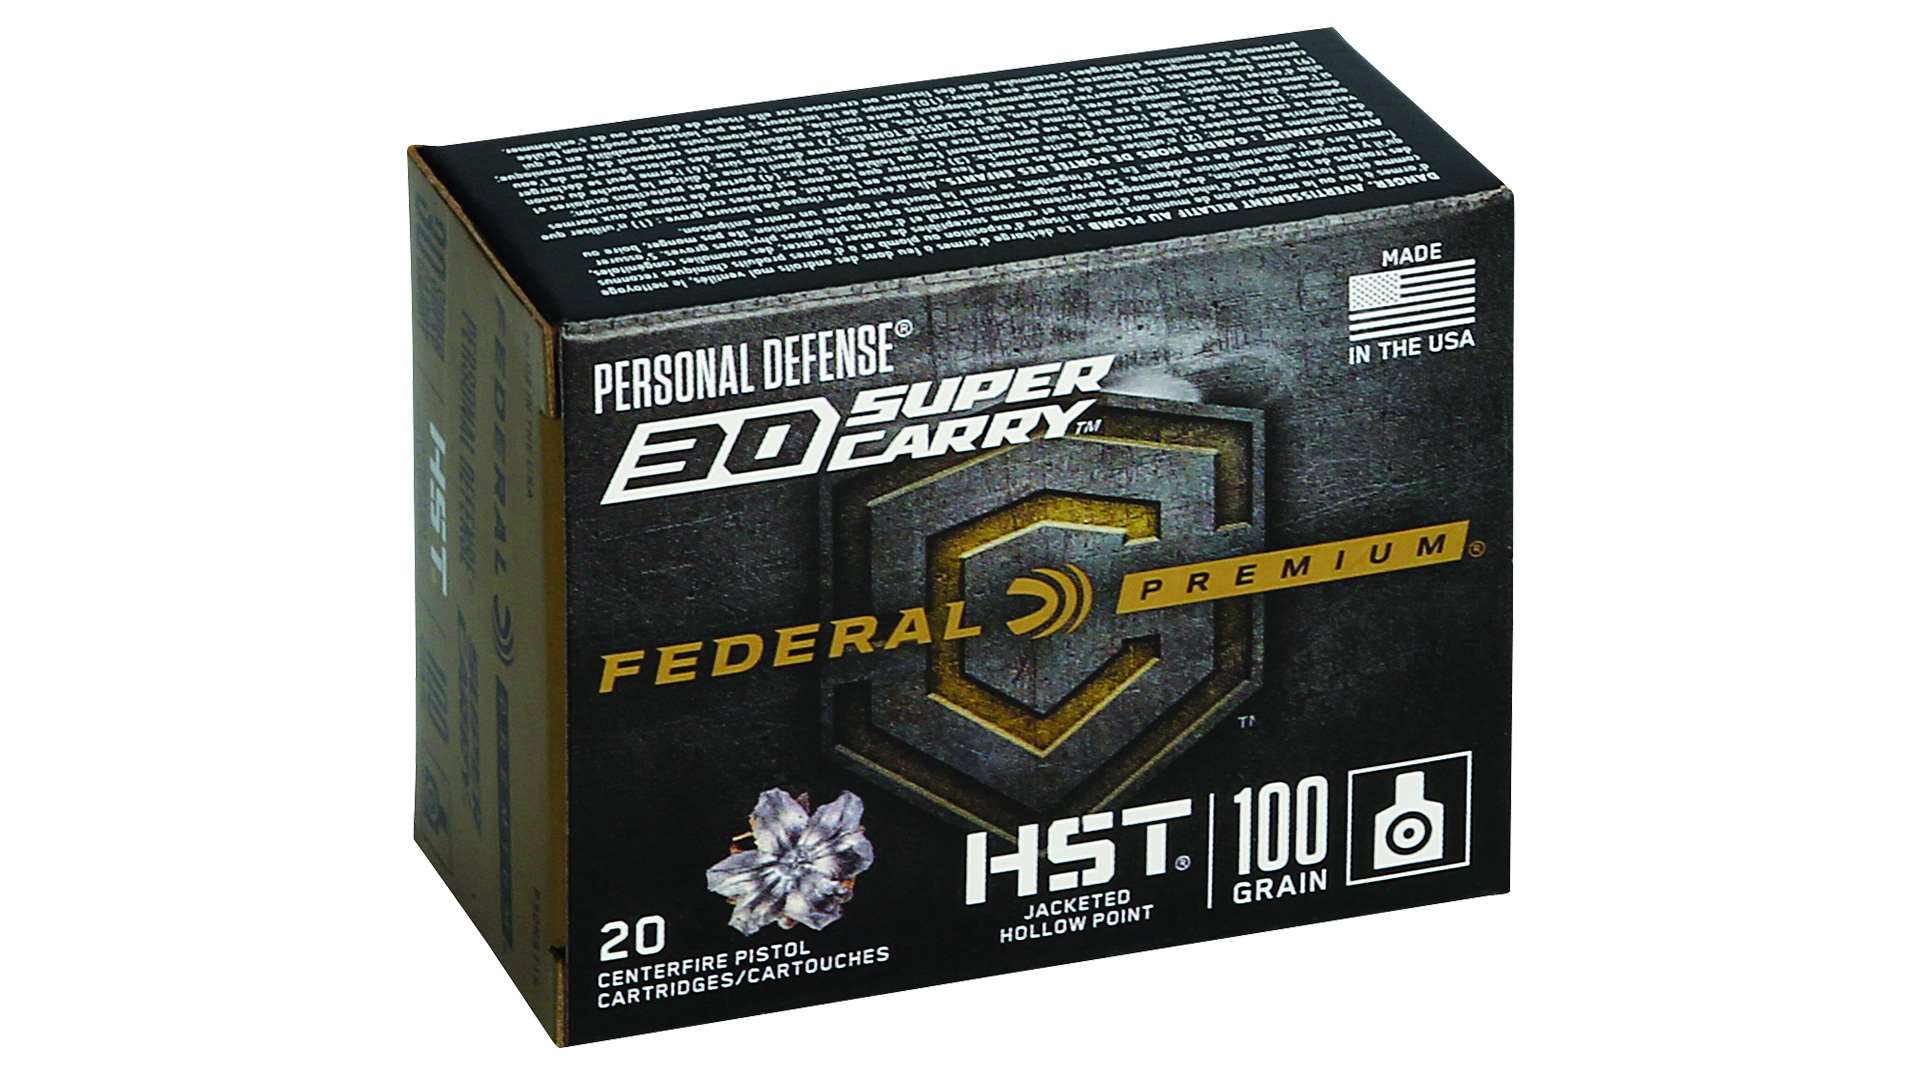 Federal’s .30 Super Carry